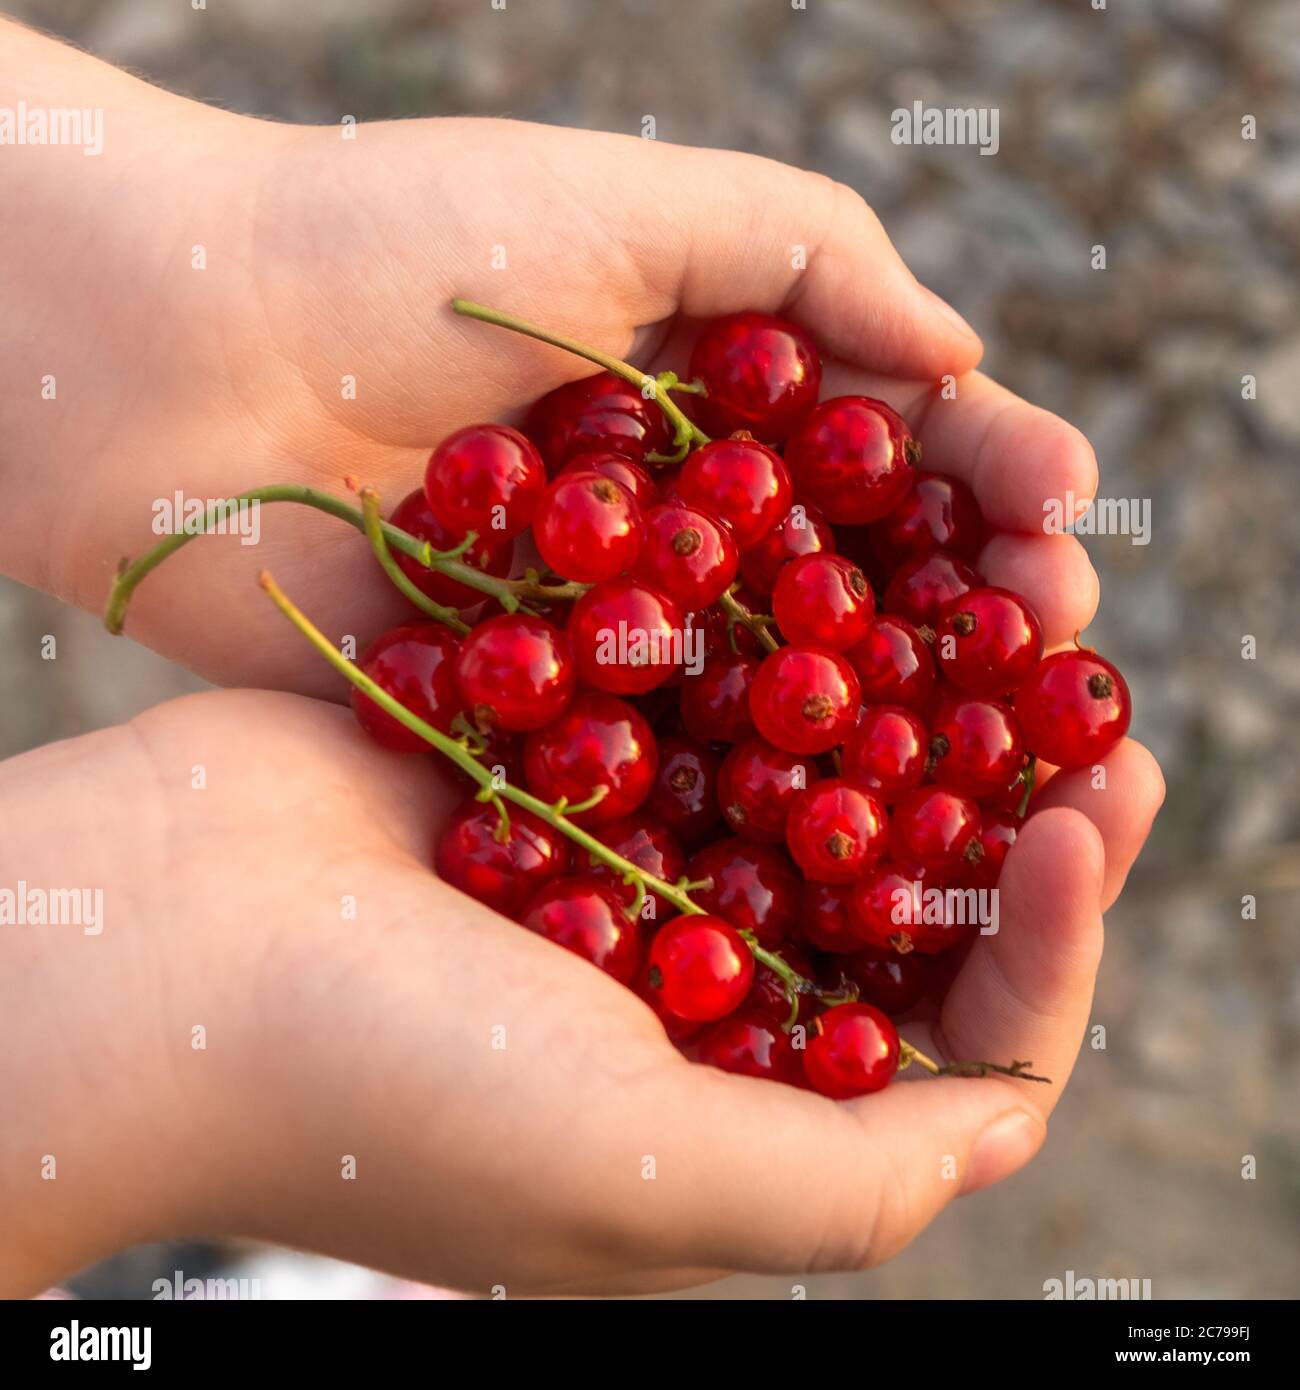 A little girl, holding red currants in her hands, making shape of heat, freshly gathered. Healthy eating, vegetarian food and people concept Stock Photo